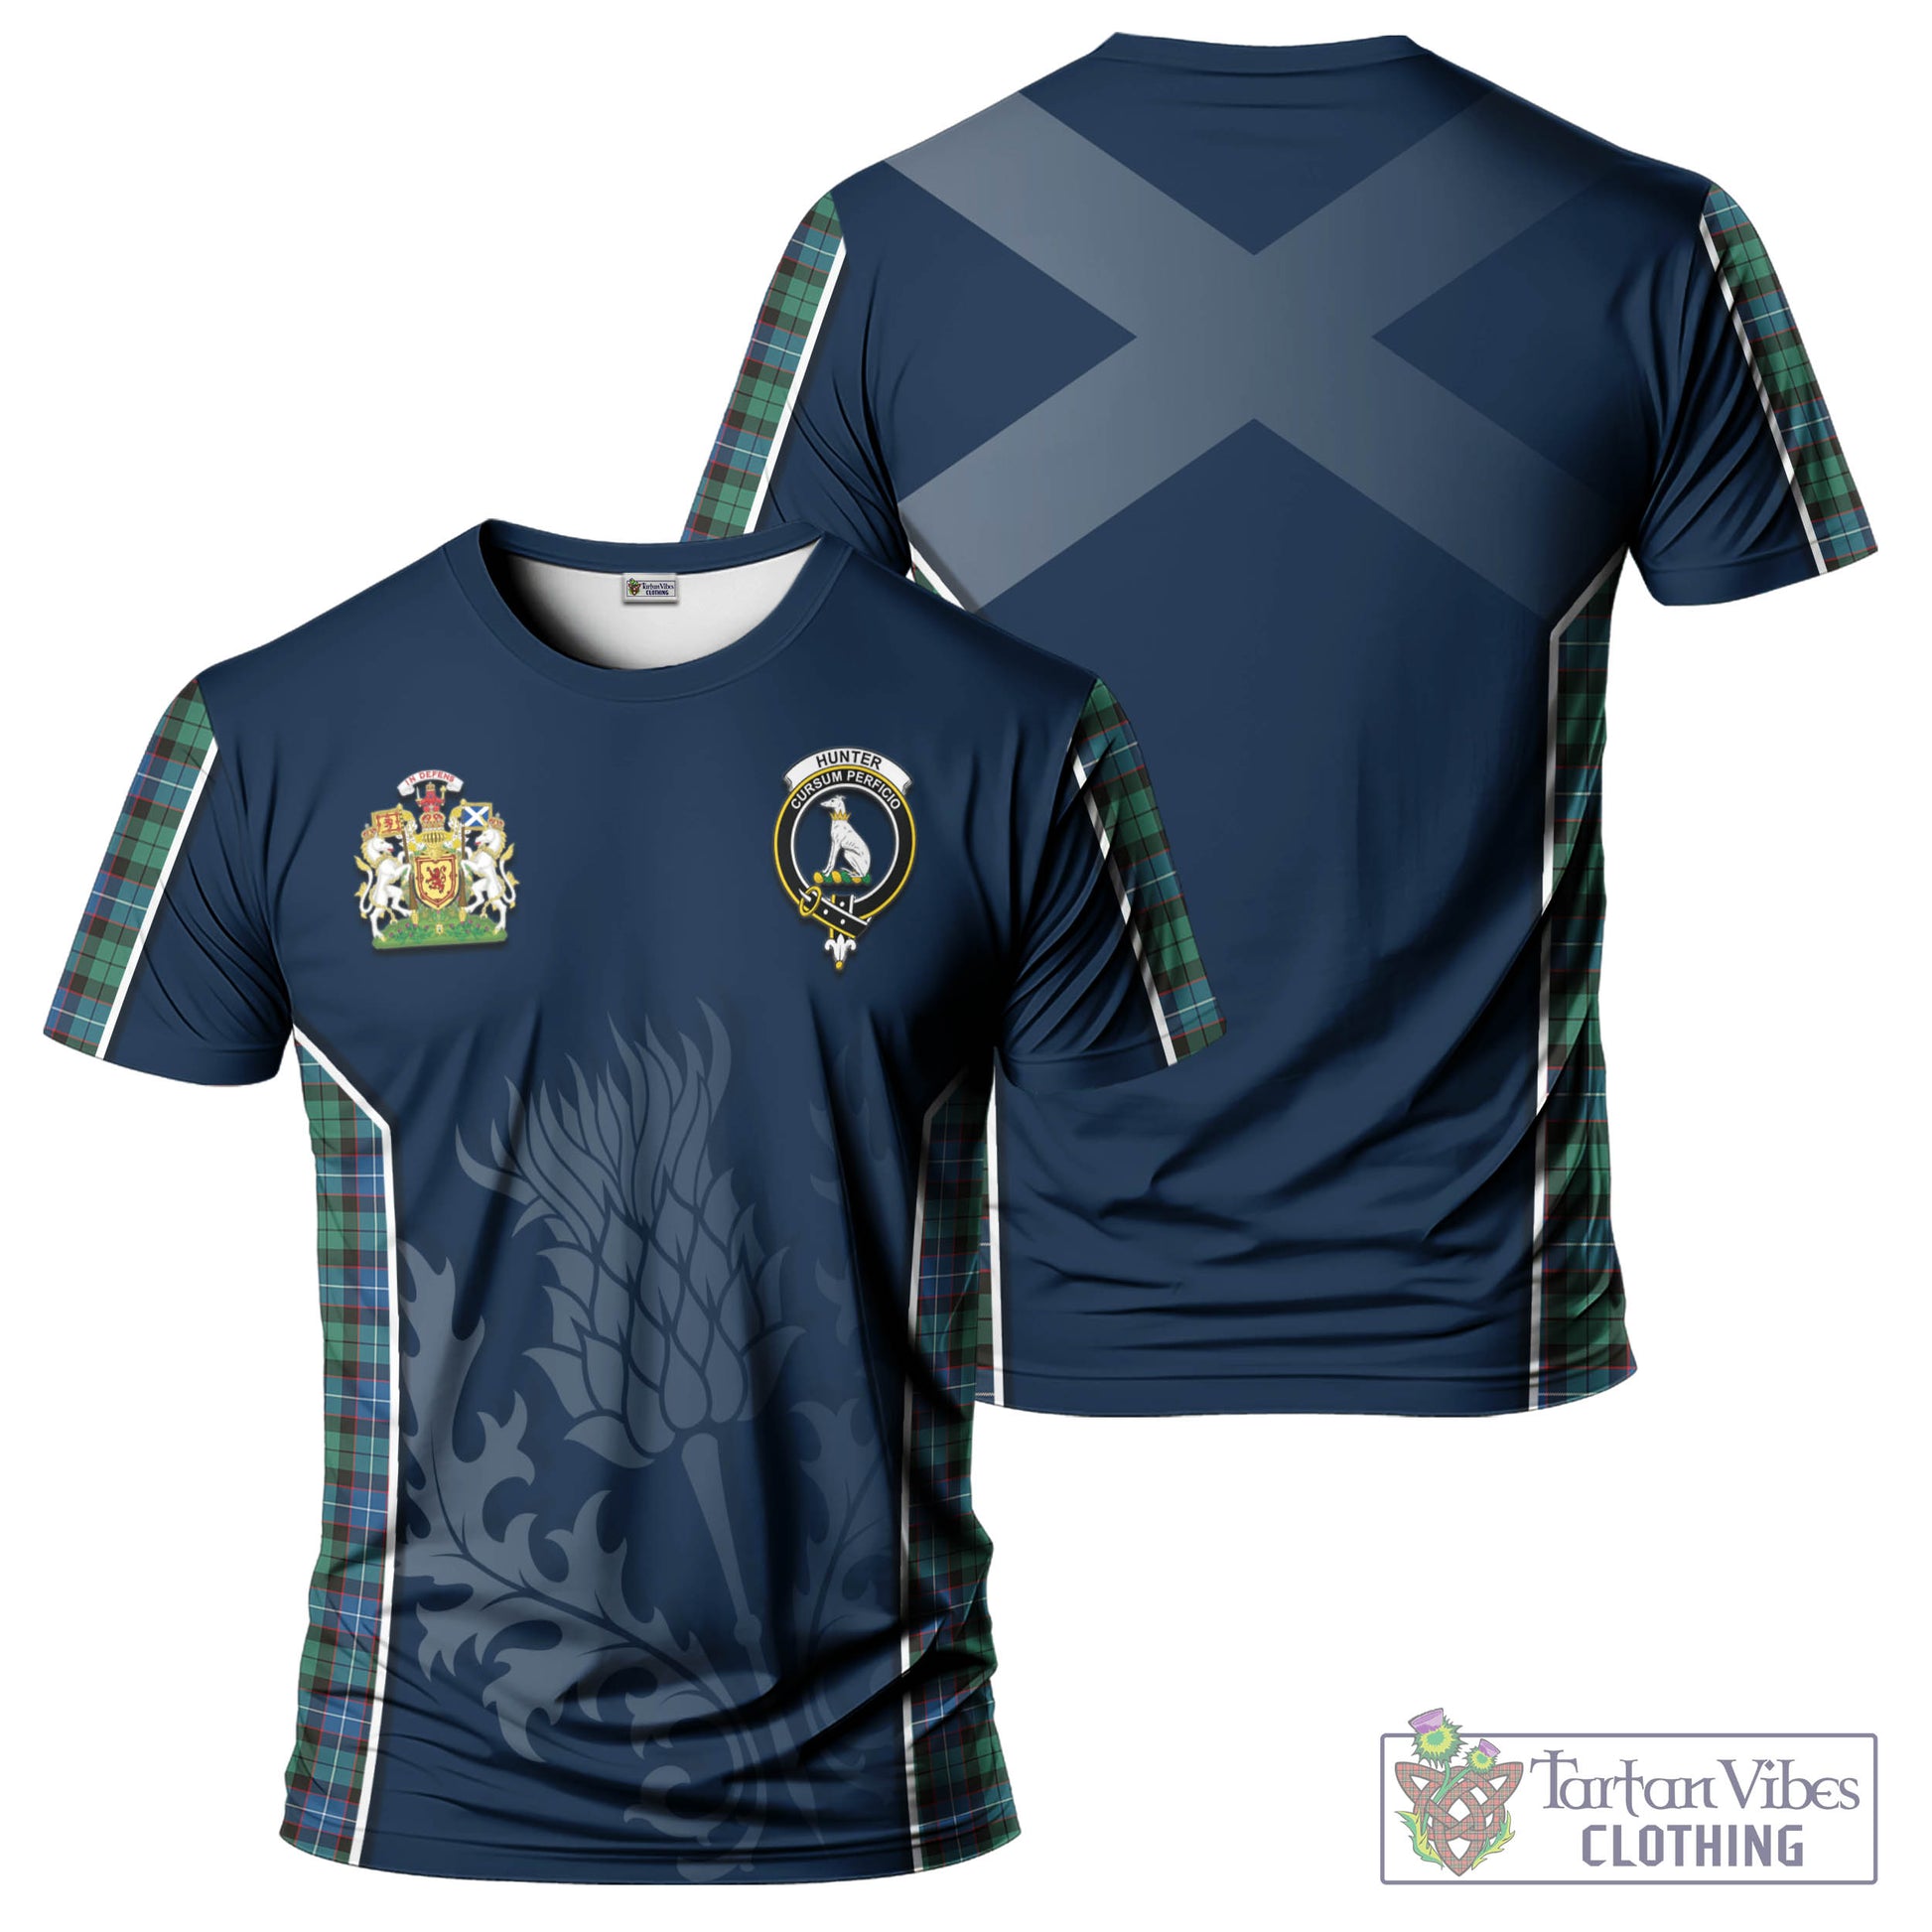 Tartan Vibes Clothing Hunter Ancient Tartan T-Shirt with Family Crest and Scottish Thistle Vibes Sport Style